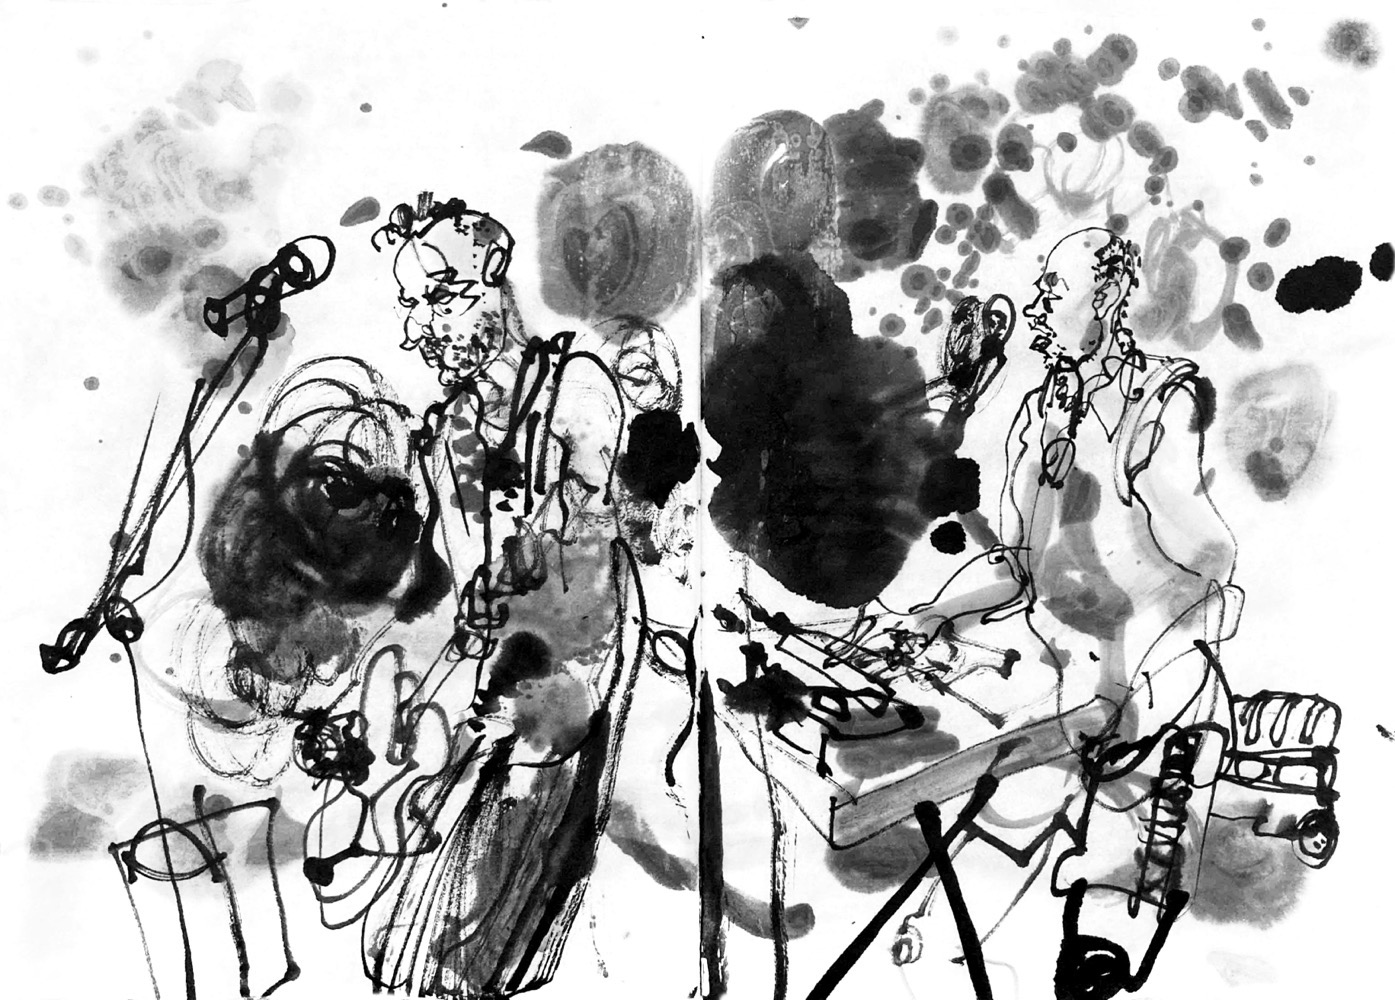 Ink ddawing of two musicianss, baseplayer and guy behind desk with electronics, both have mics too.